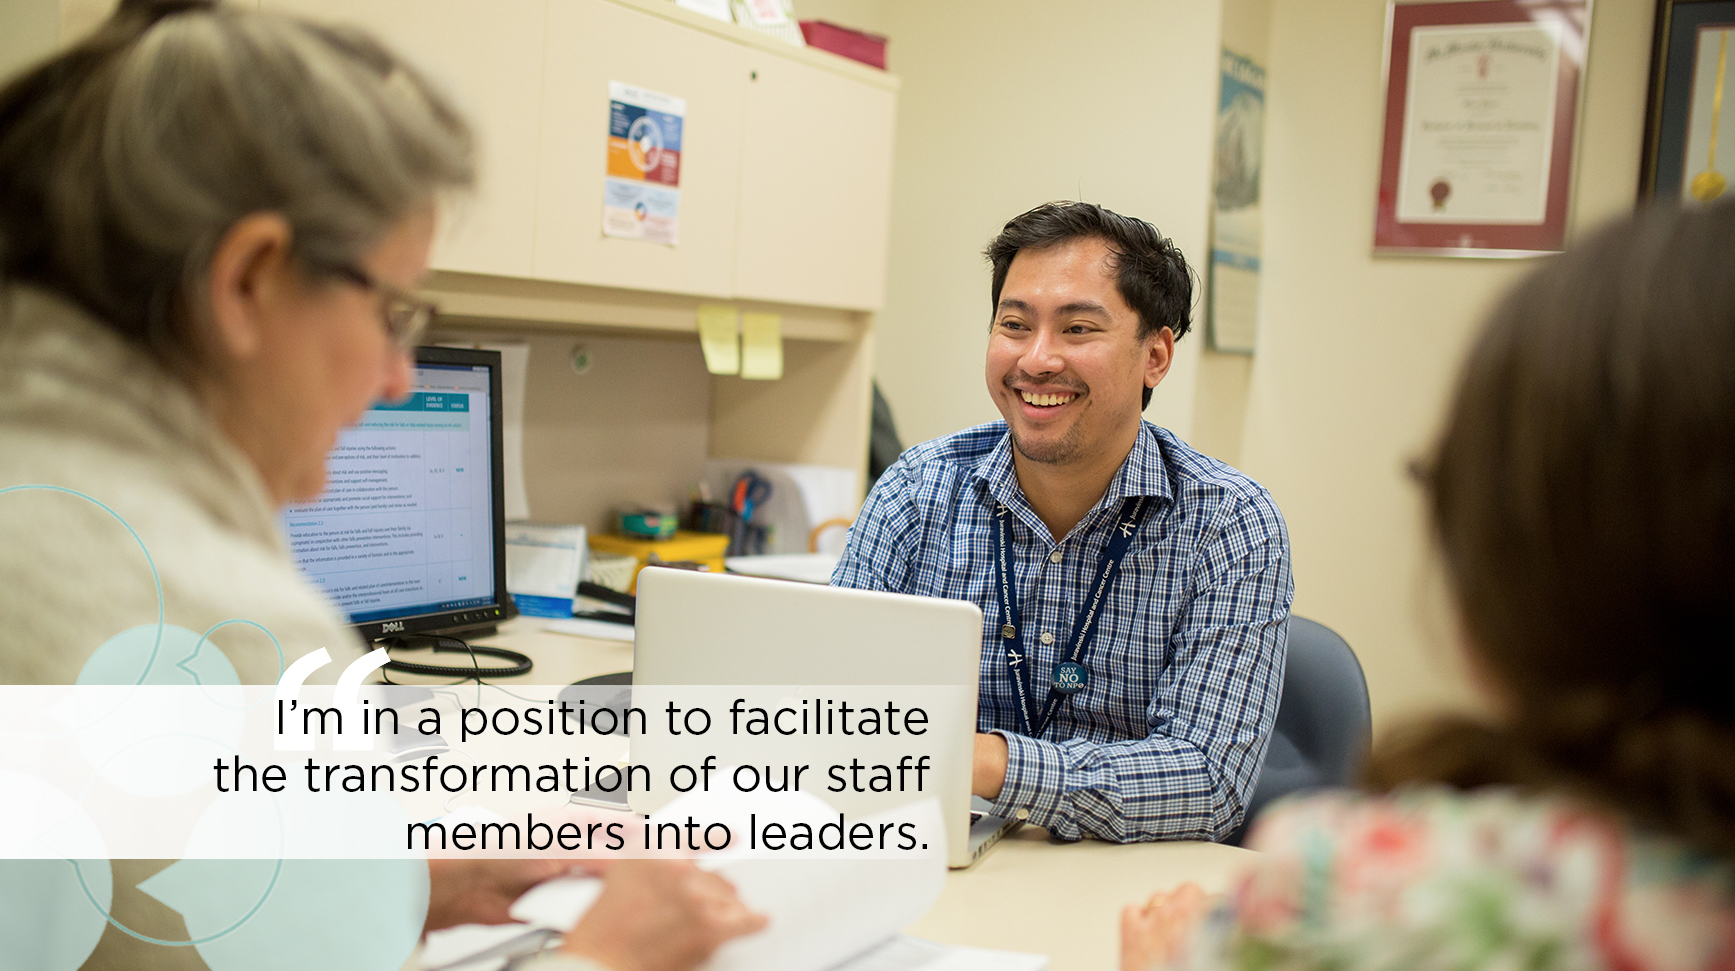 A clinical leader sits at a desk with colleagues in discussion